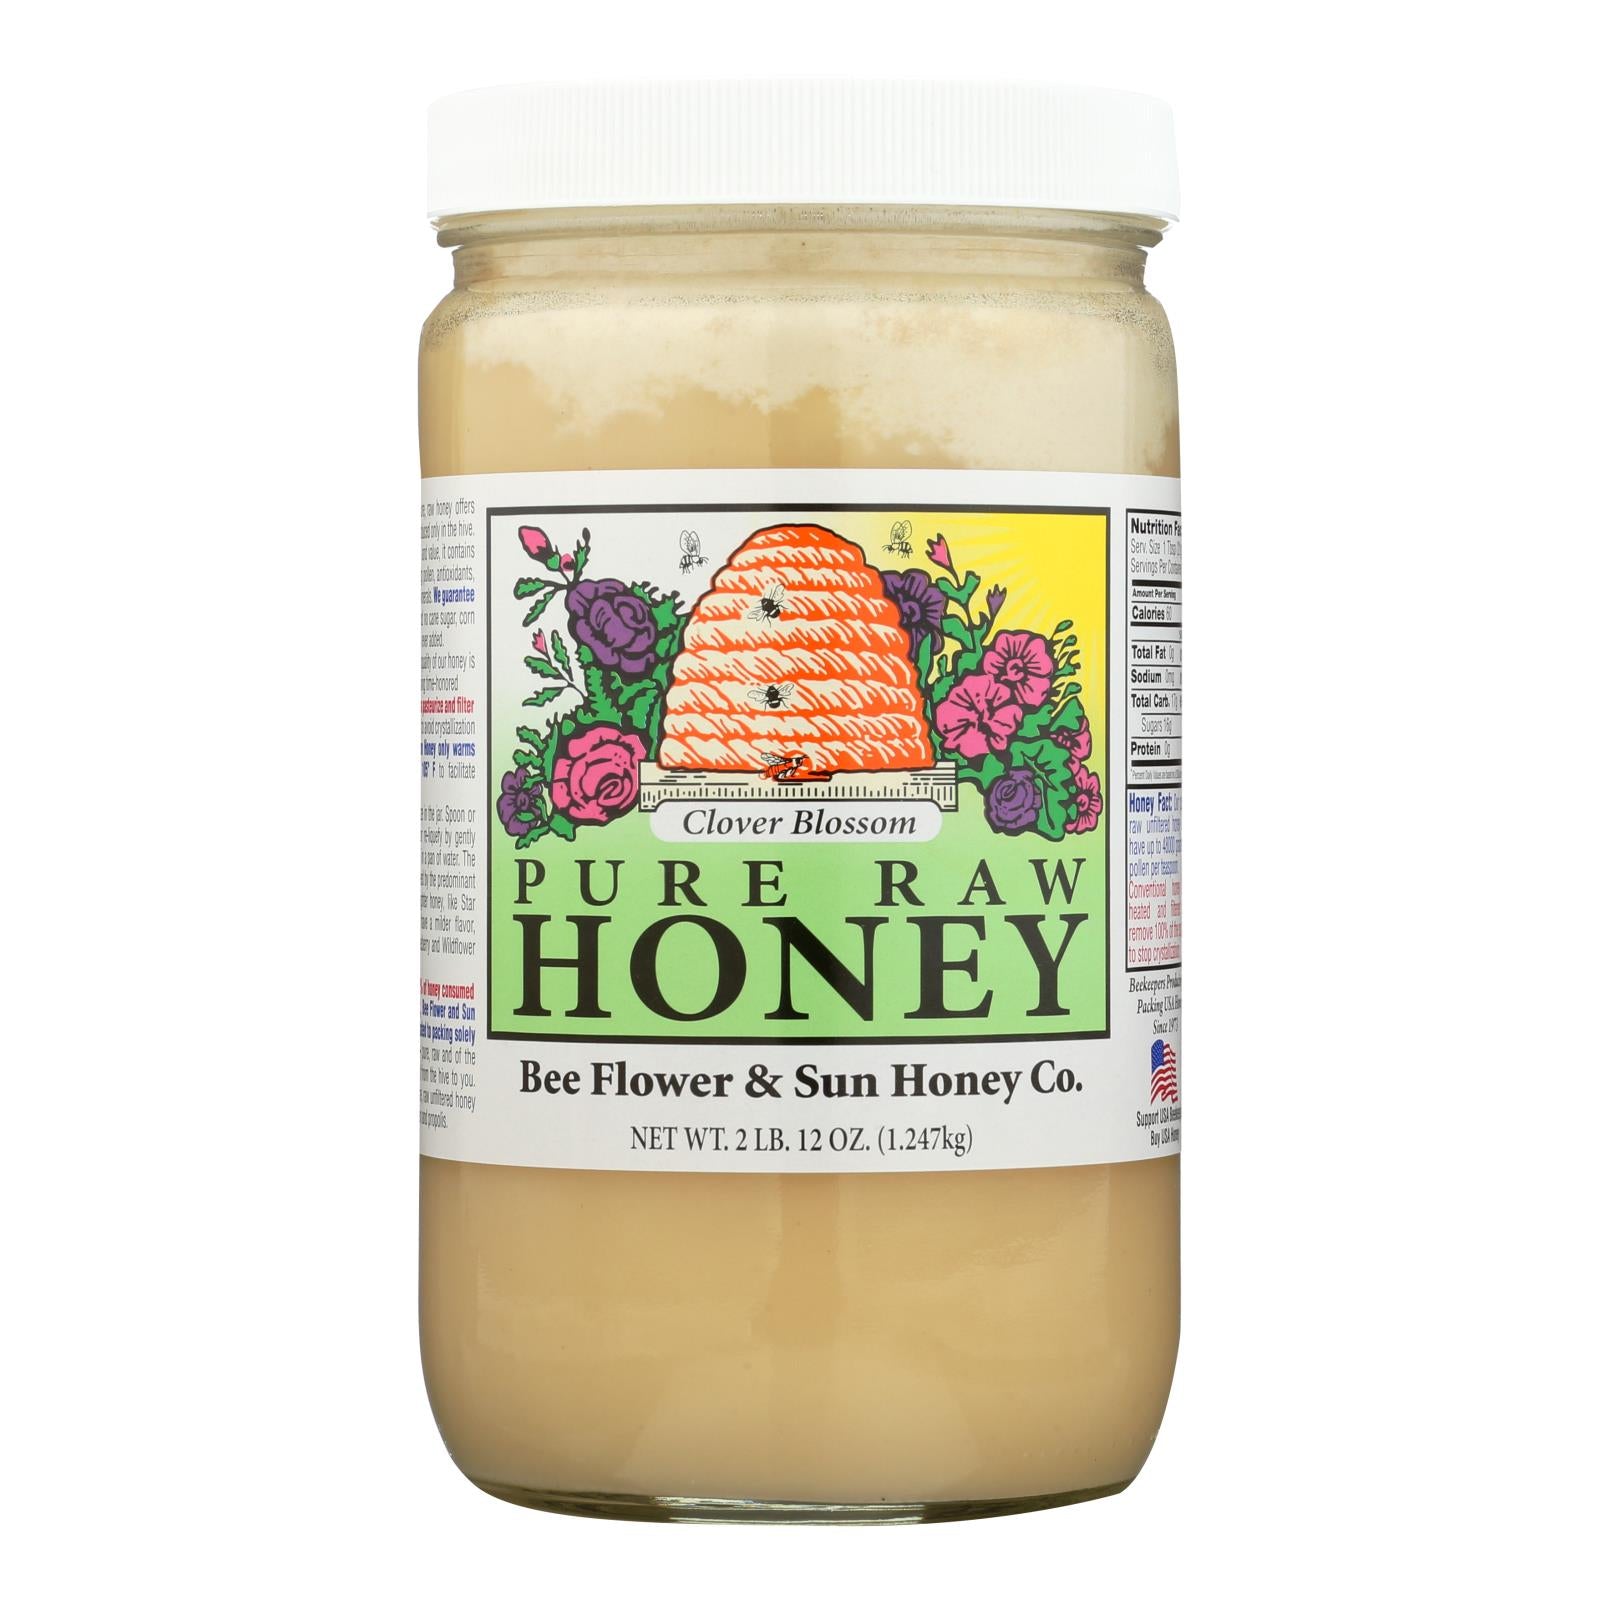 Bee Flower & Sun Honey Co. Clover Blossom Pure Raw Honey - Case Of 6 - 44 Oz - Whole Green Foods